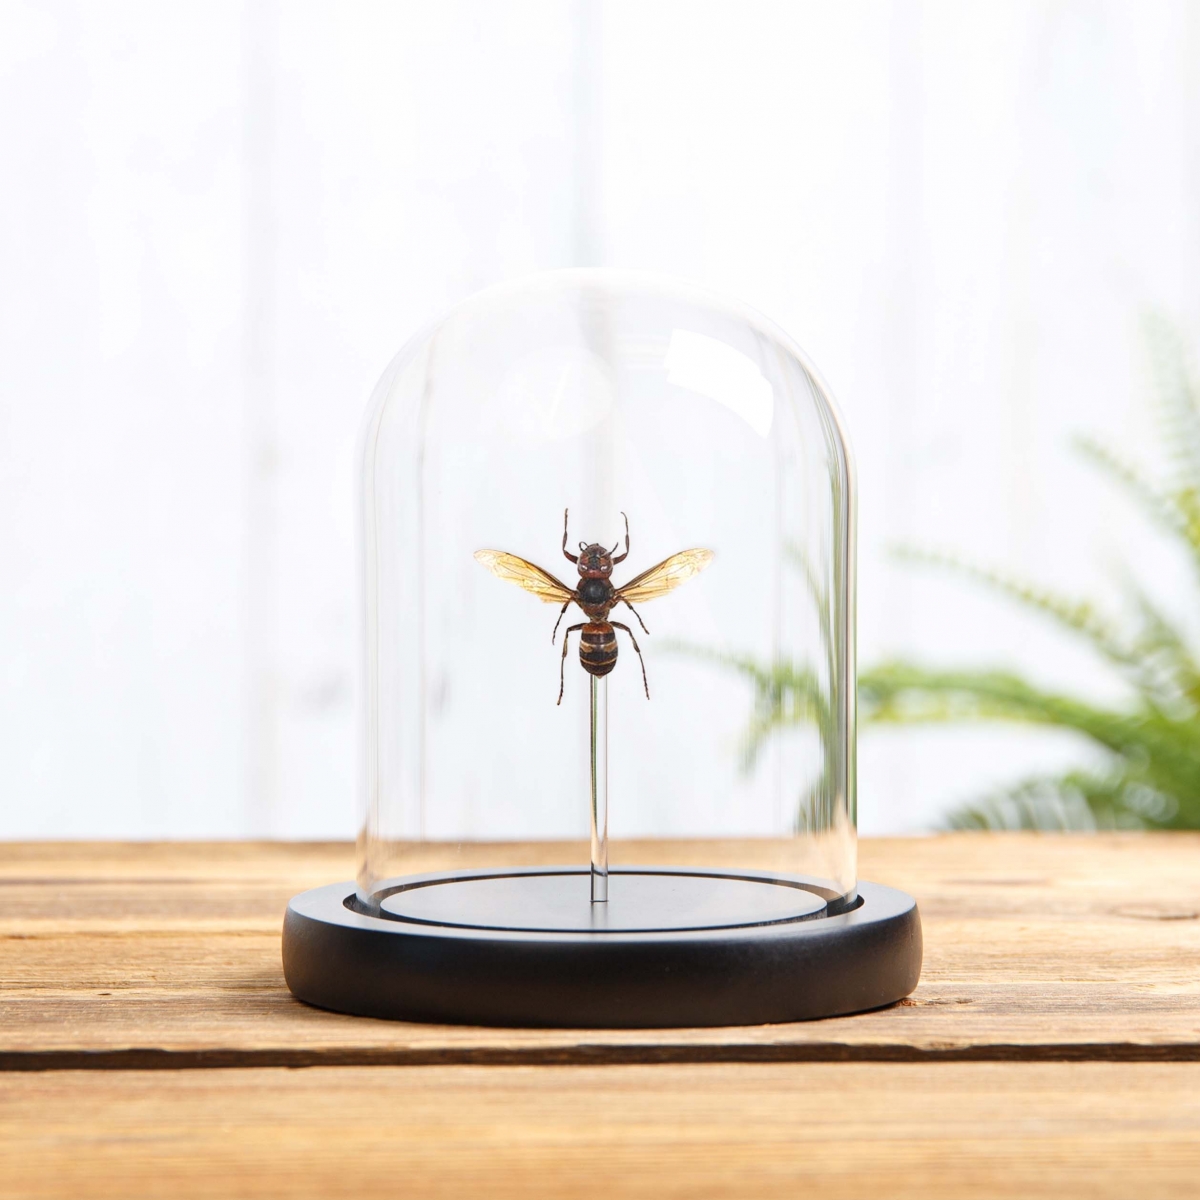 Minibeast Yellow-vented Hornet in Glass Dome with Wooden Base (Vespa analis)